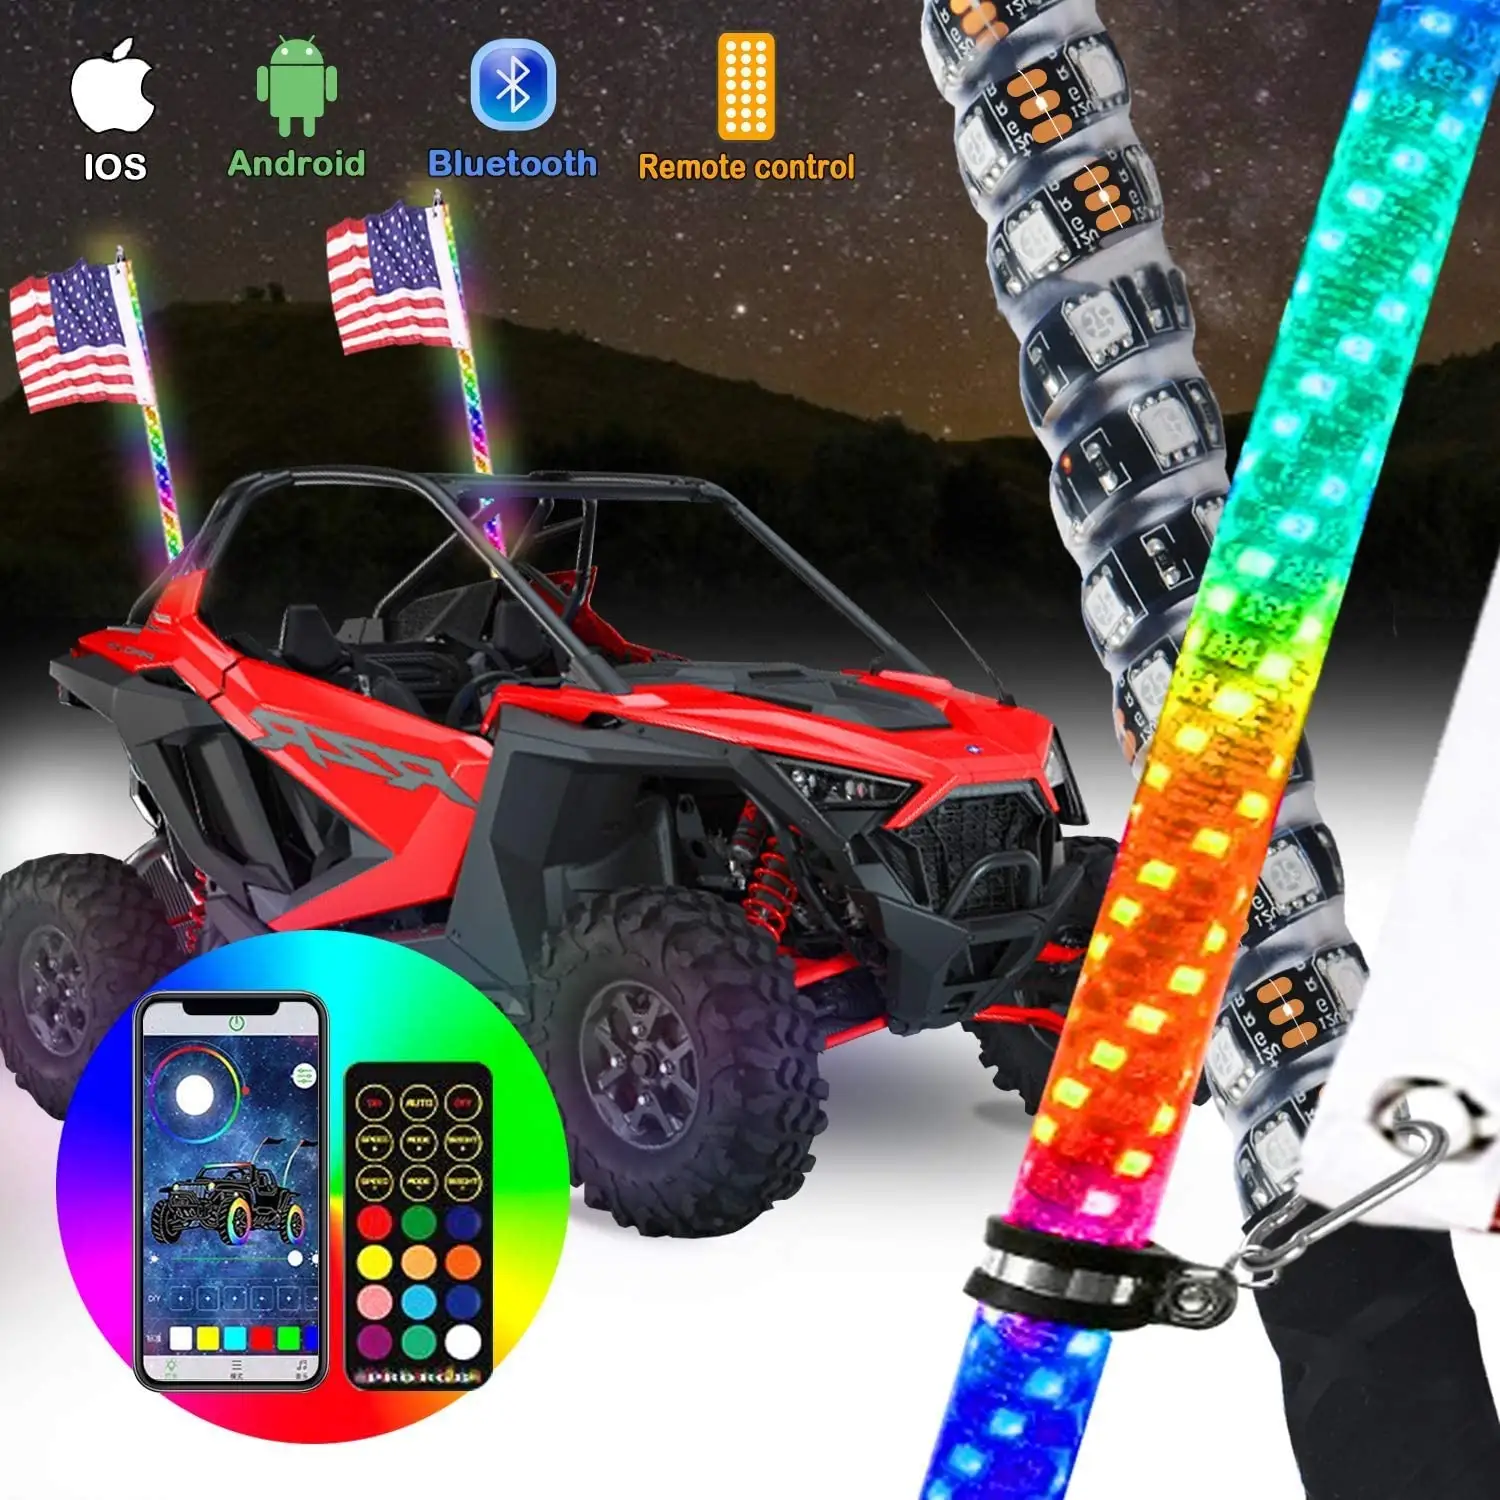 Light Whip QEEDON US Warehouse 3/4/5/6ft LED Whip Flag Lights RGB Waterproof Remote Control Buggy Whip Antenna LED Multicolor Dance Pole